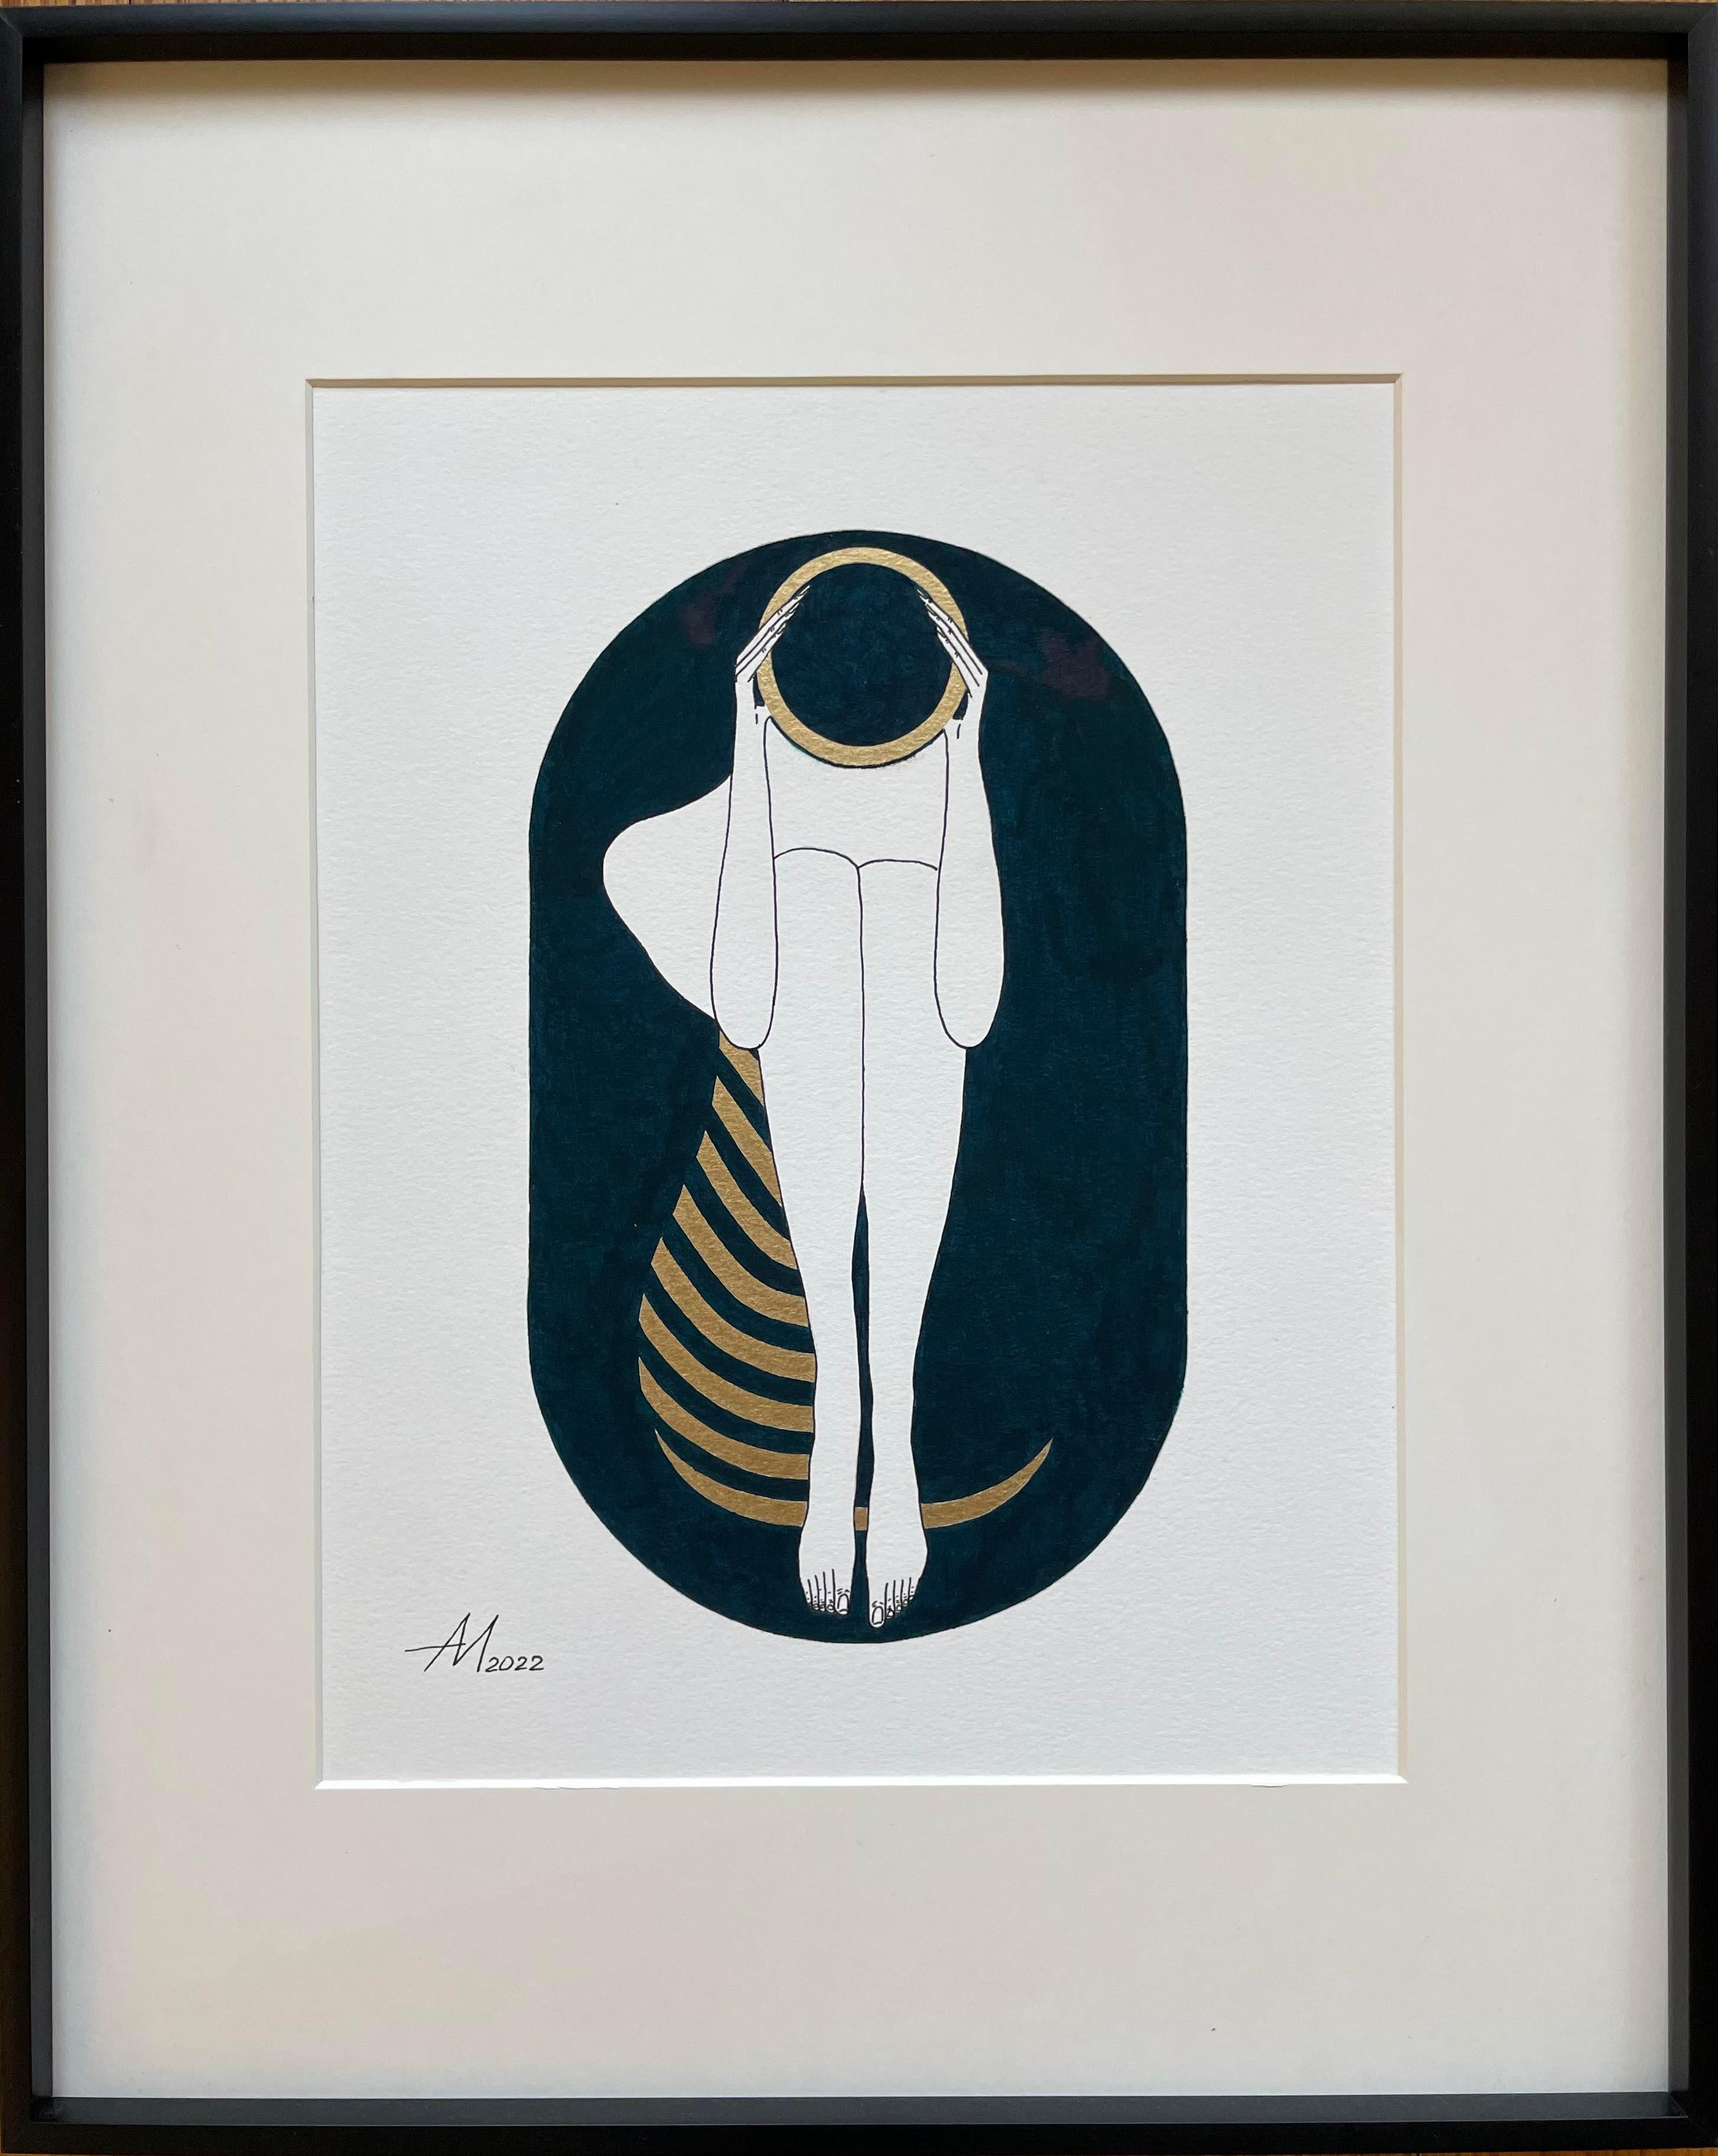 Turquoise blue and white capsule -line drawing figure with gold disk and stripes - Art by Mila Akopova